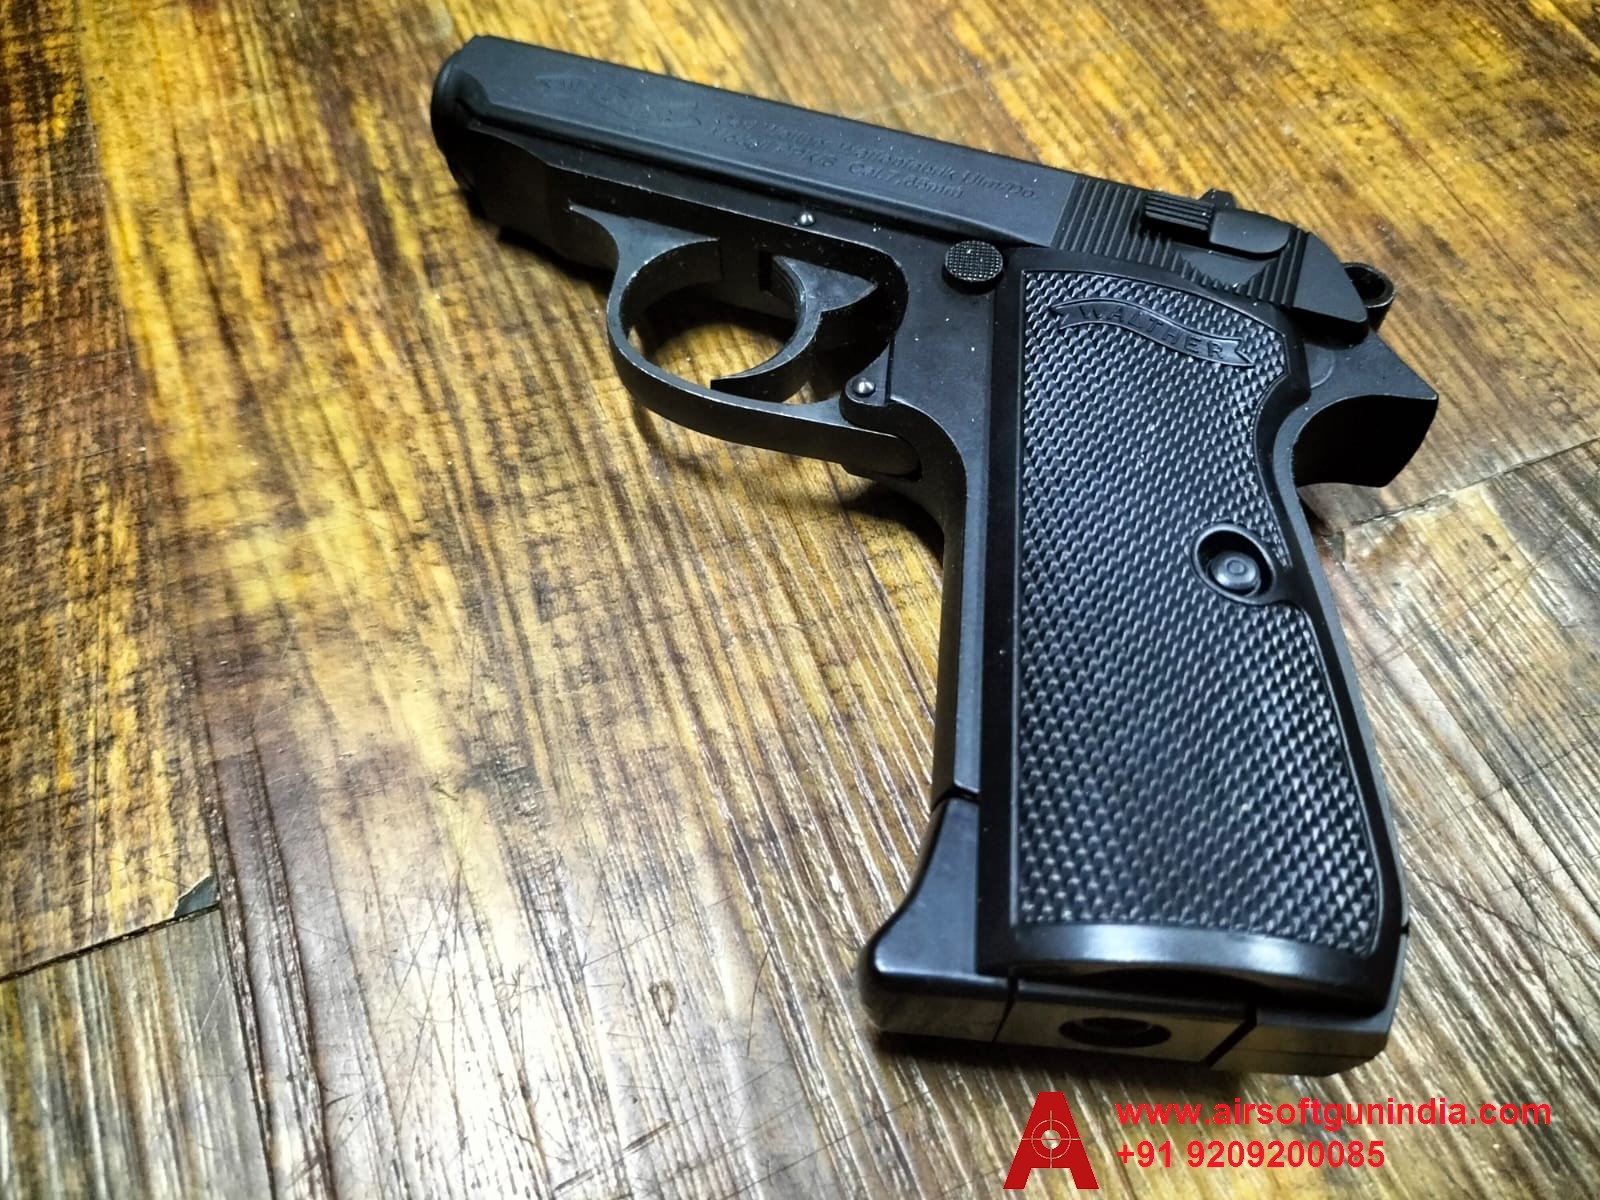 Walther PPK/S Cal.177, 4.5mm Co2 BB Air Pistol By Airsoft Gun India